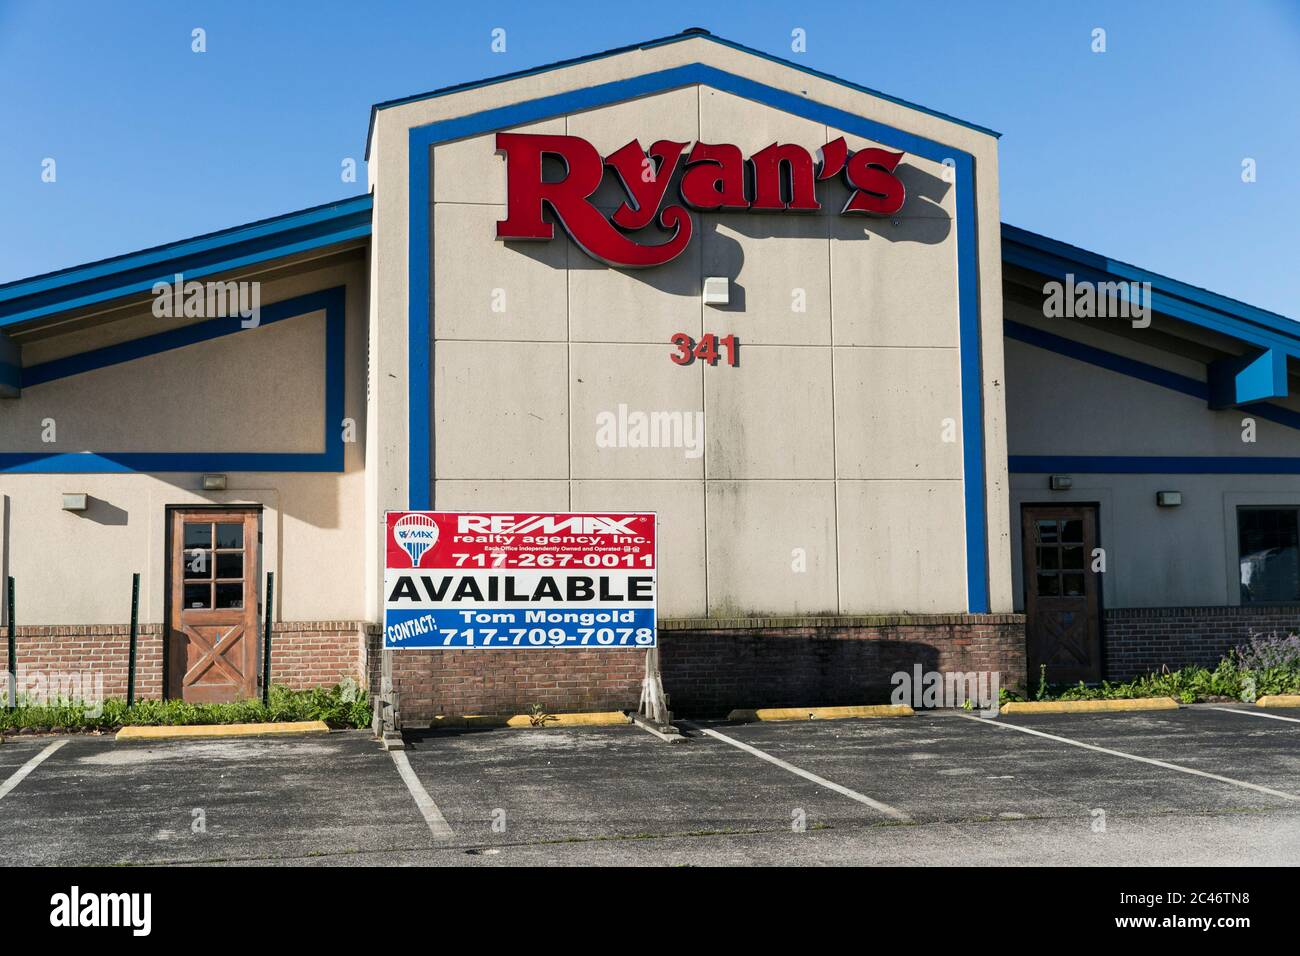 A logo sign outside of a closed and abandoned Ryan's Buffet restaurant location in Hanover, Pennsylvania on June 12, 2020. Stock Photo